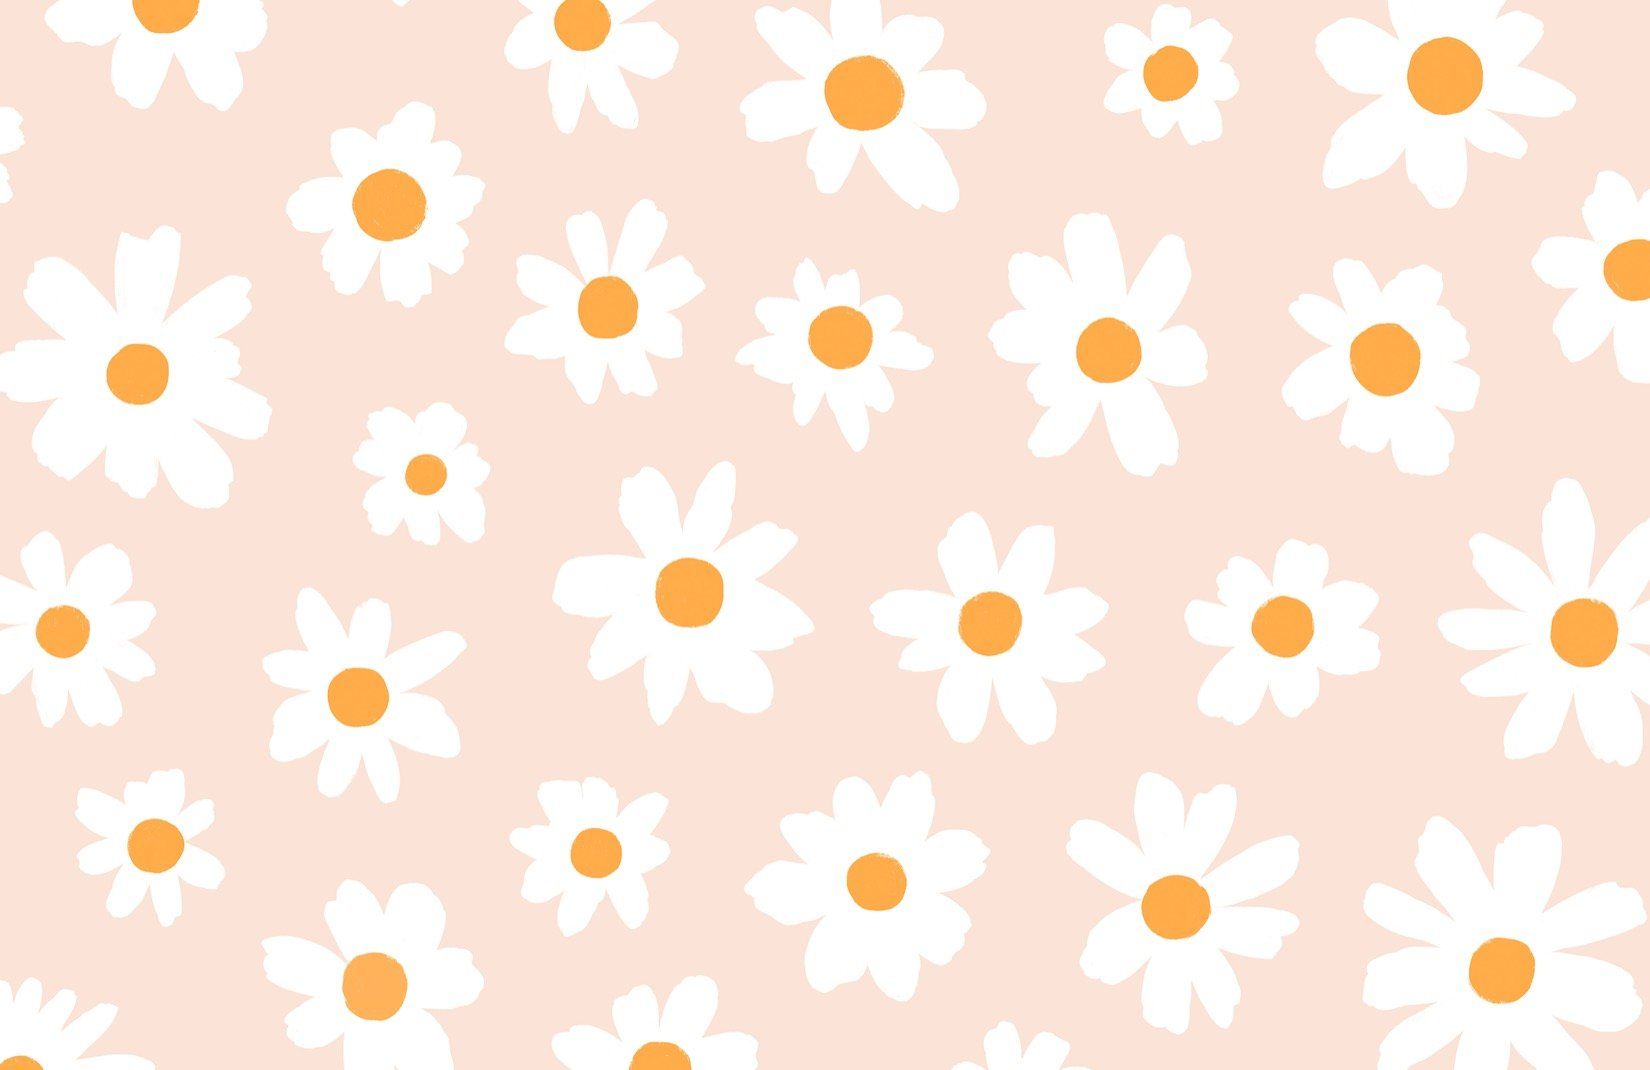 A pattern of daisies on pink background - Daisy, flower